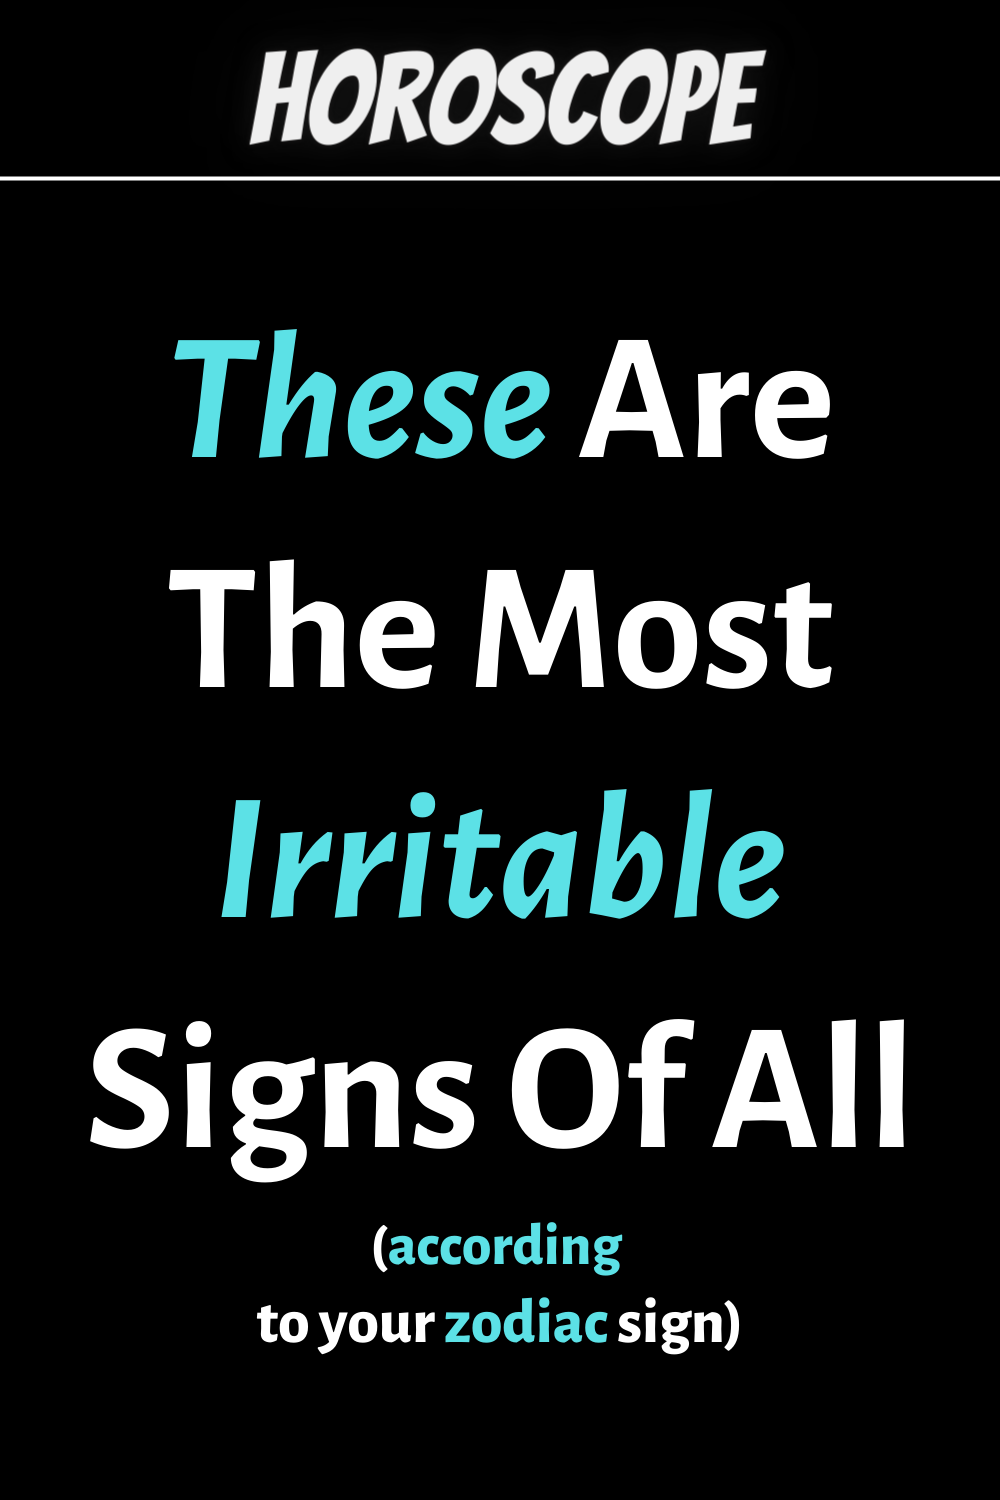 These Are The Most Irritable Signs